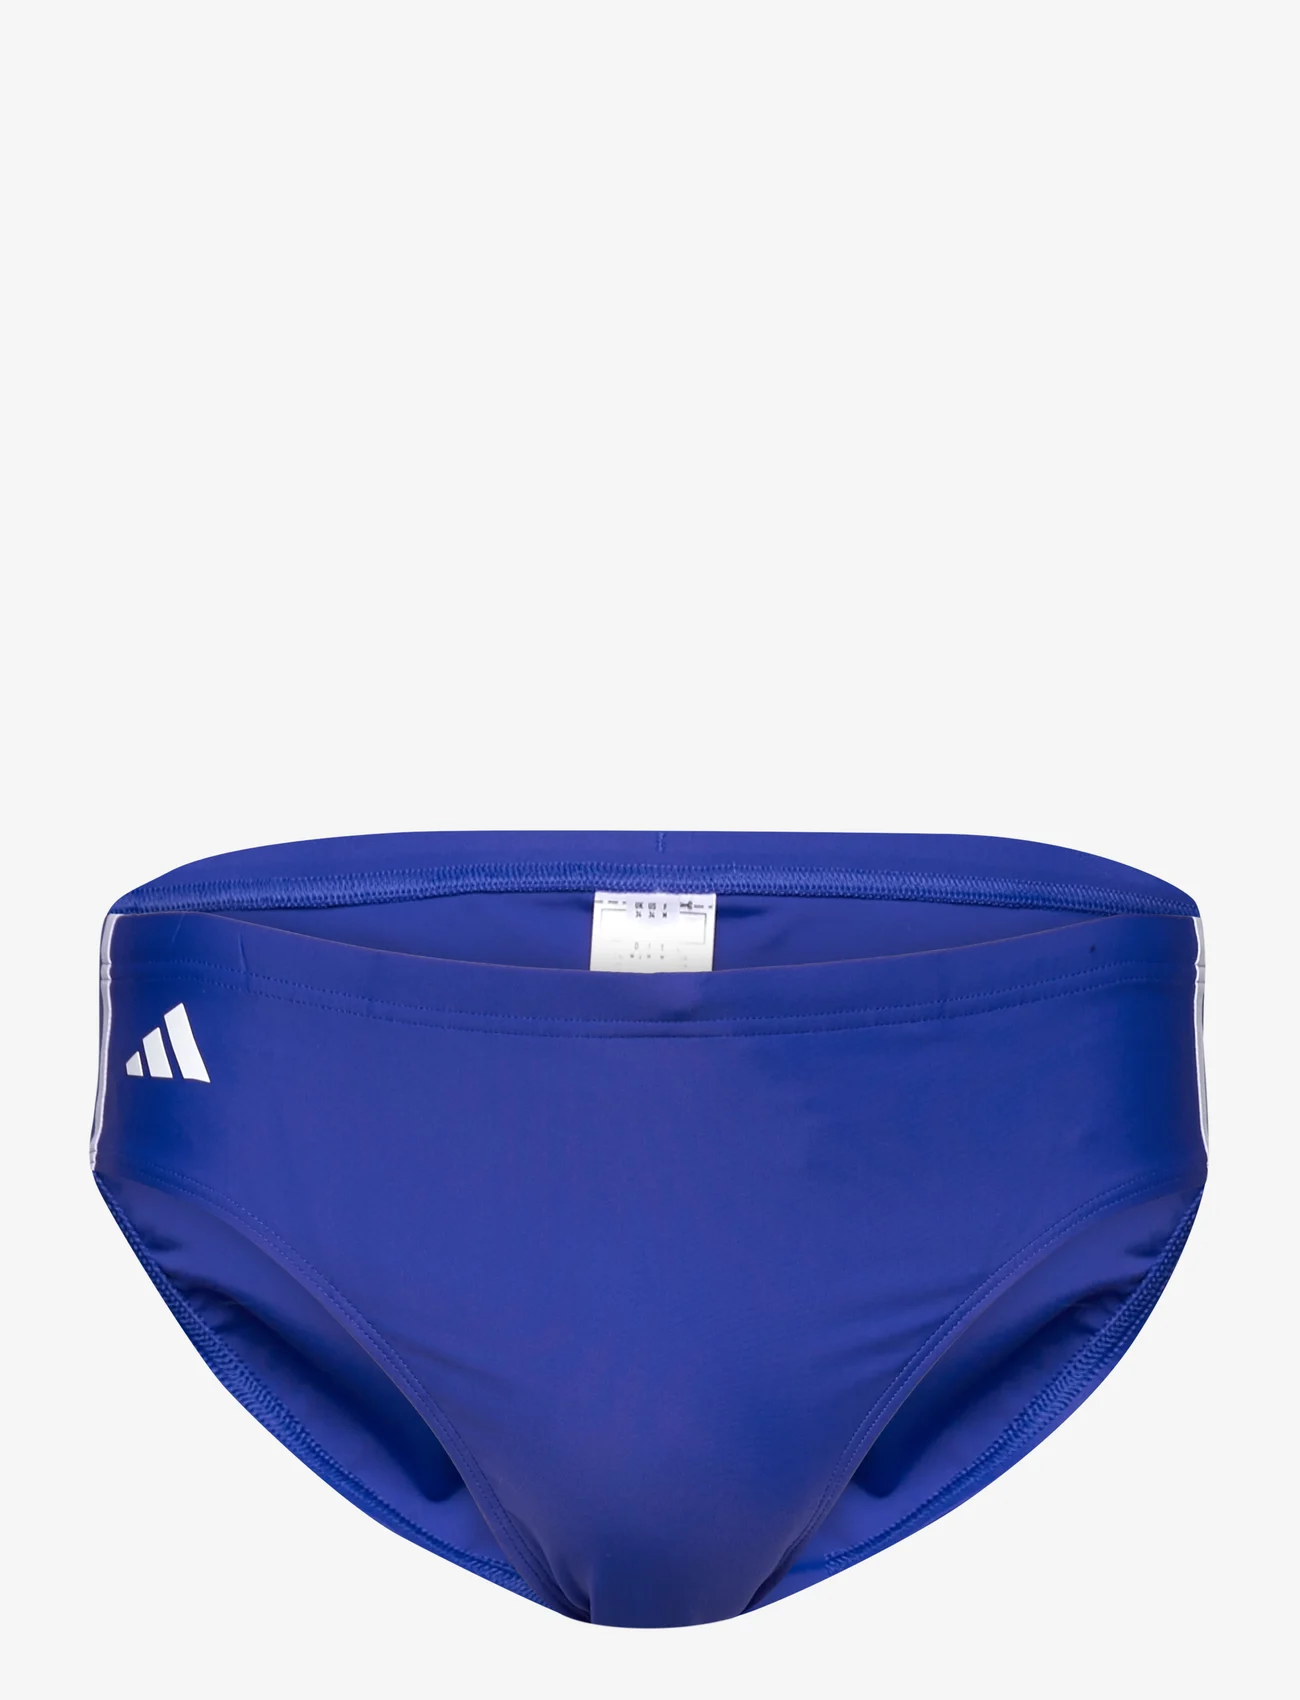 adidas Performance - 3STRIPES TRUNK - lowest prices - selubl/white - 0